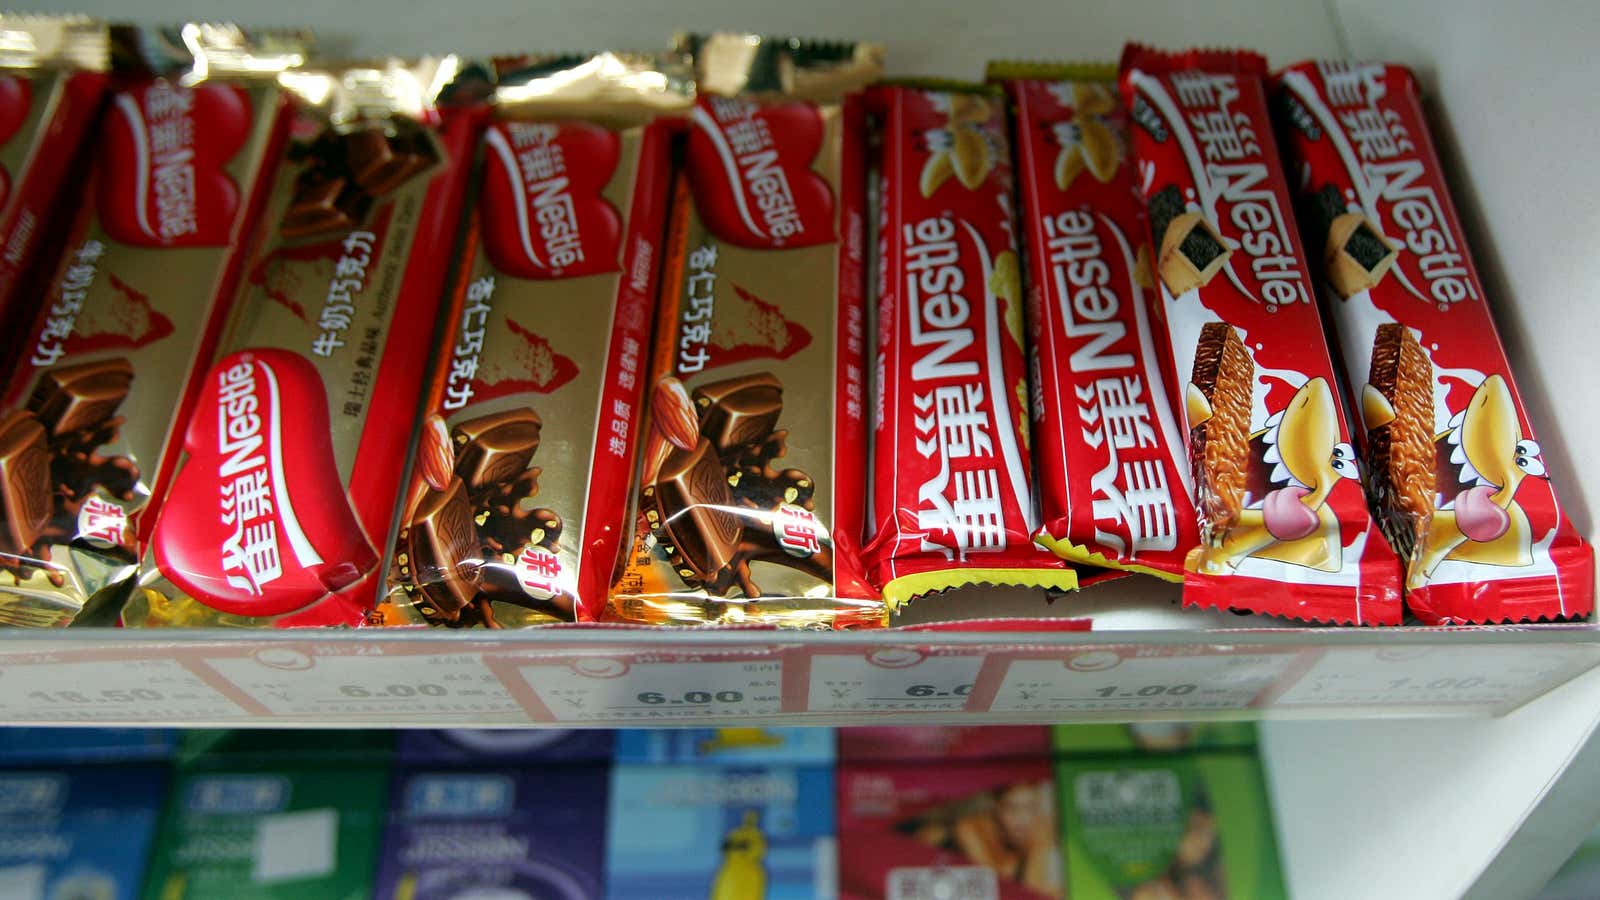 Hershey is making an American play with its products in China, and a Chinese play with its products in the US.